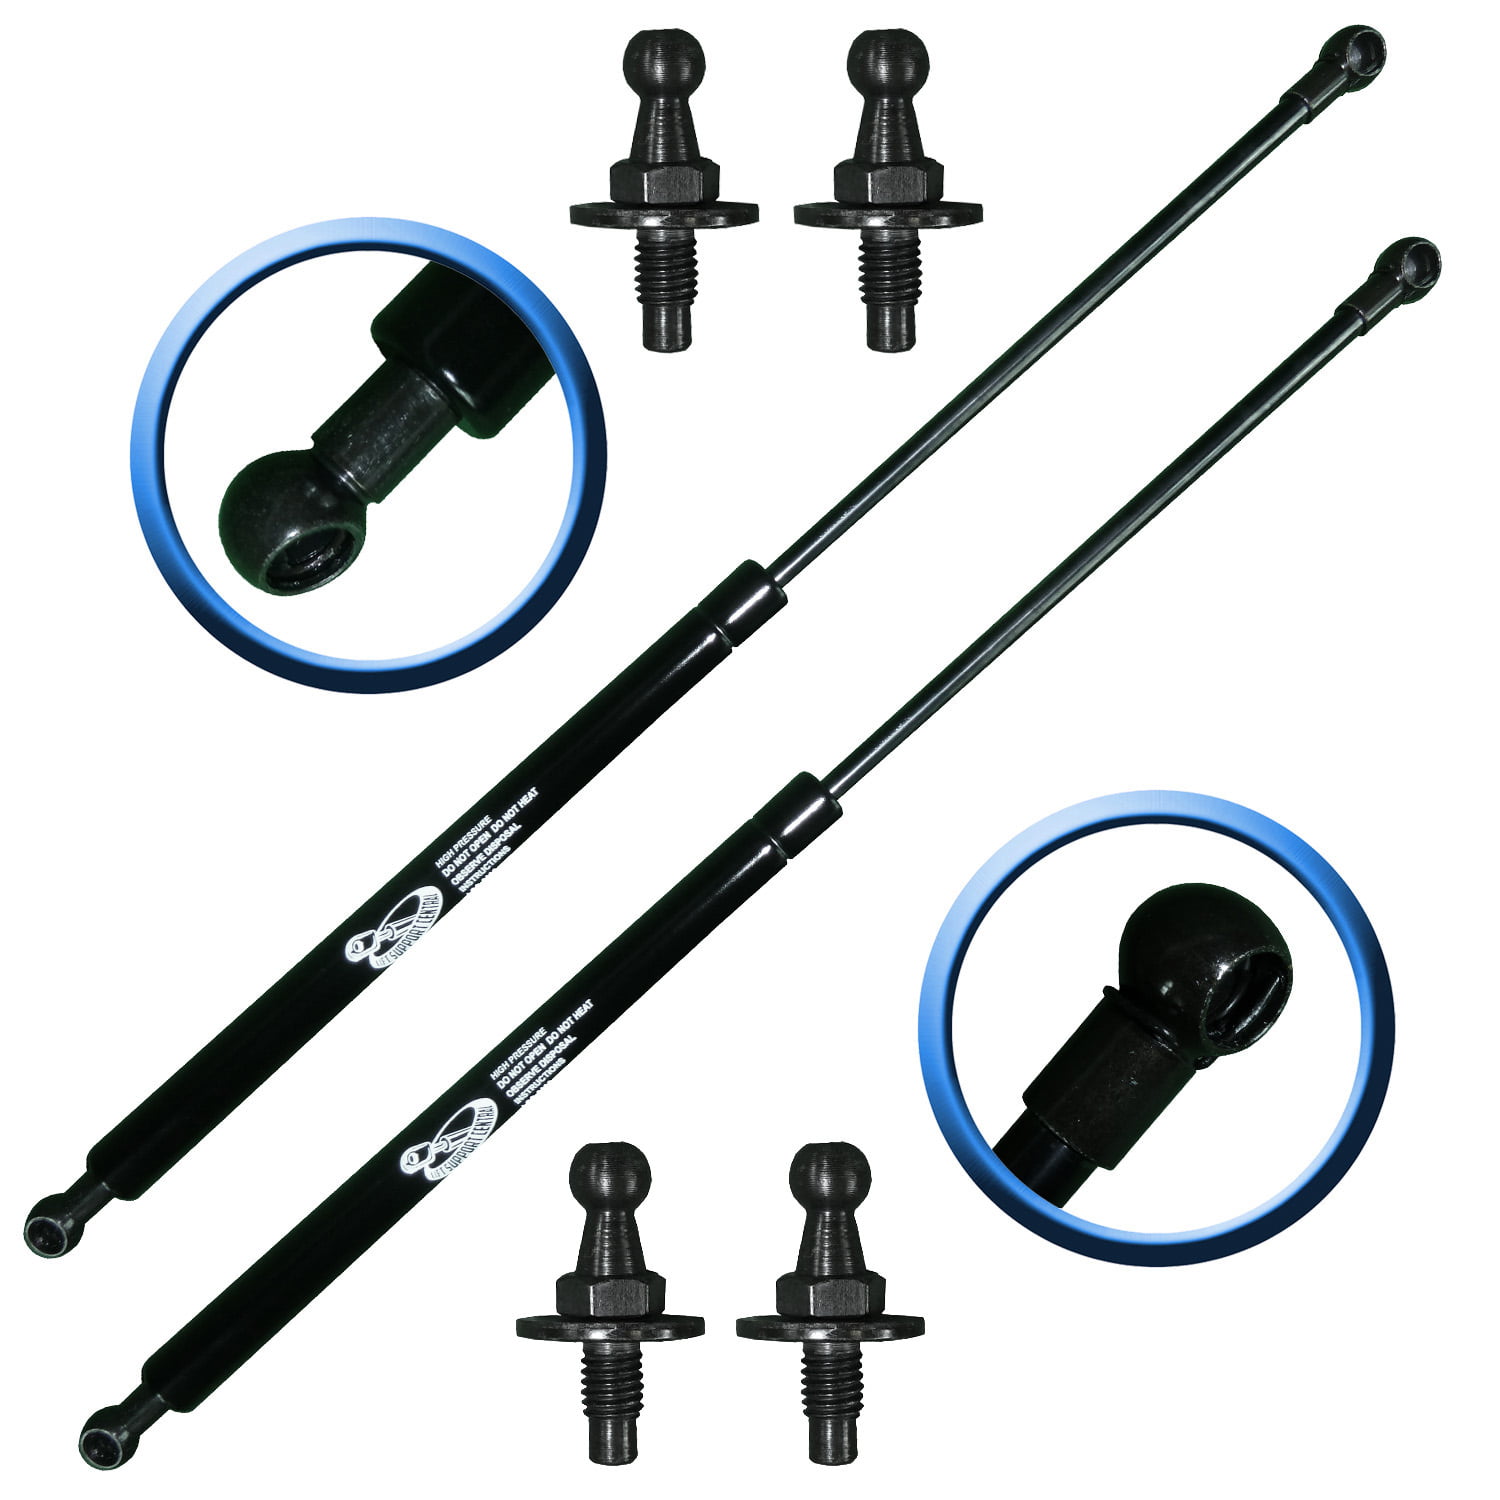 Also for Lexus GX470 2003-2009 B Blesiya 2pcs Front Hood Gas Charged Lift Supports with 4 OEM Replacement Studs for Toyota 4Runner 2003-2009 